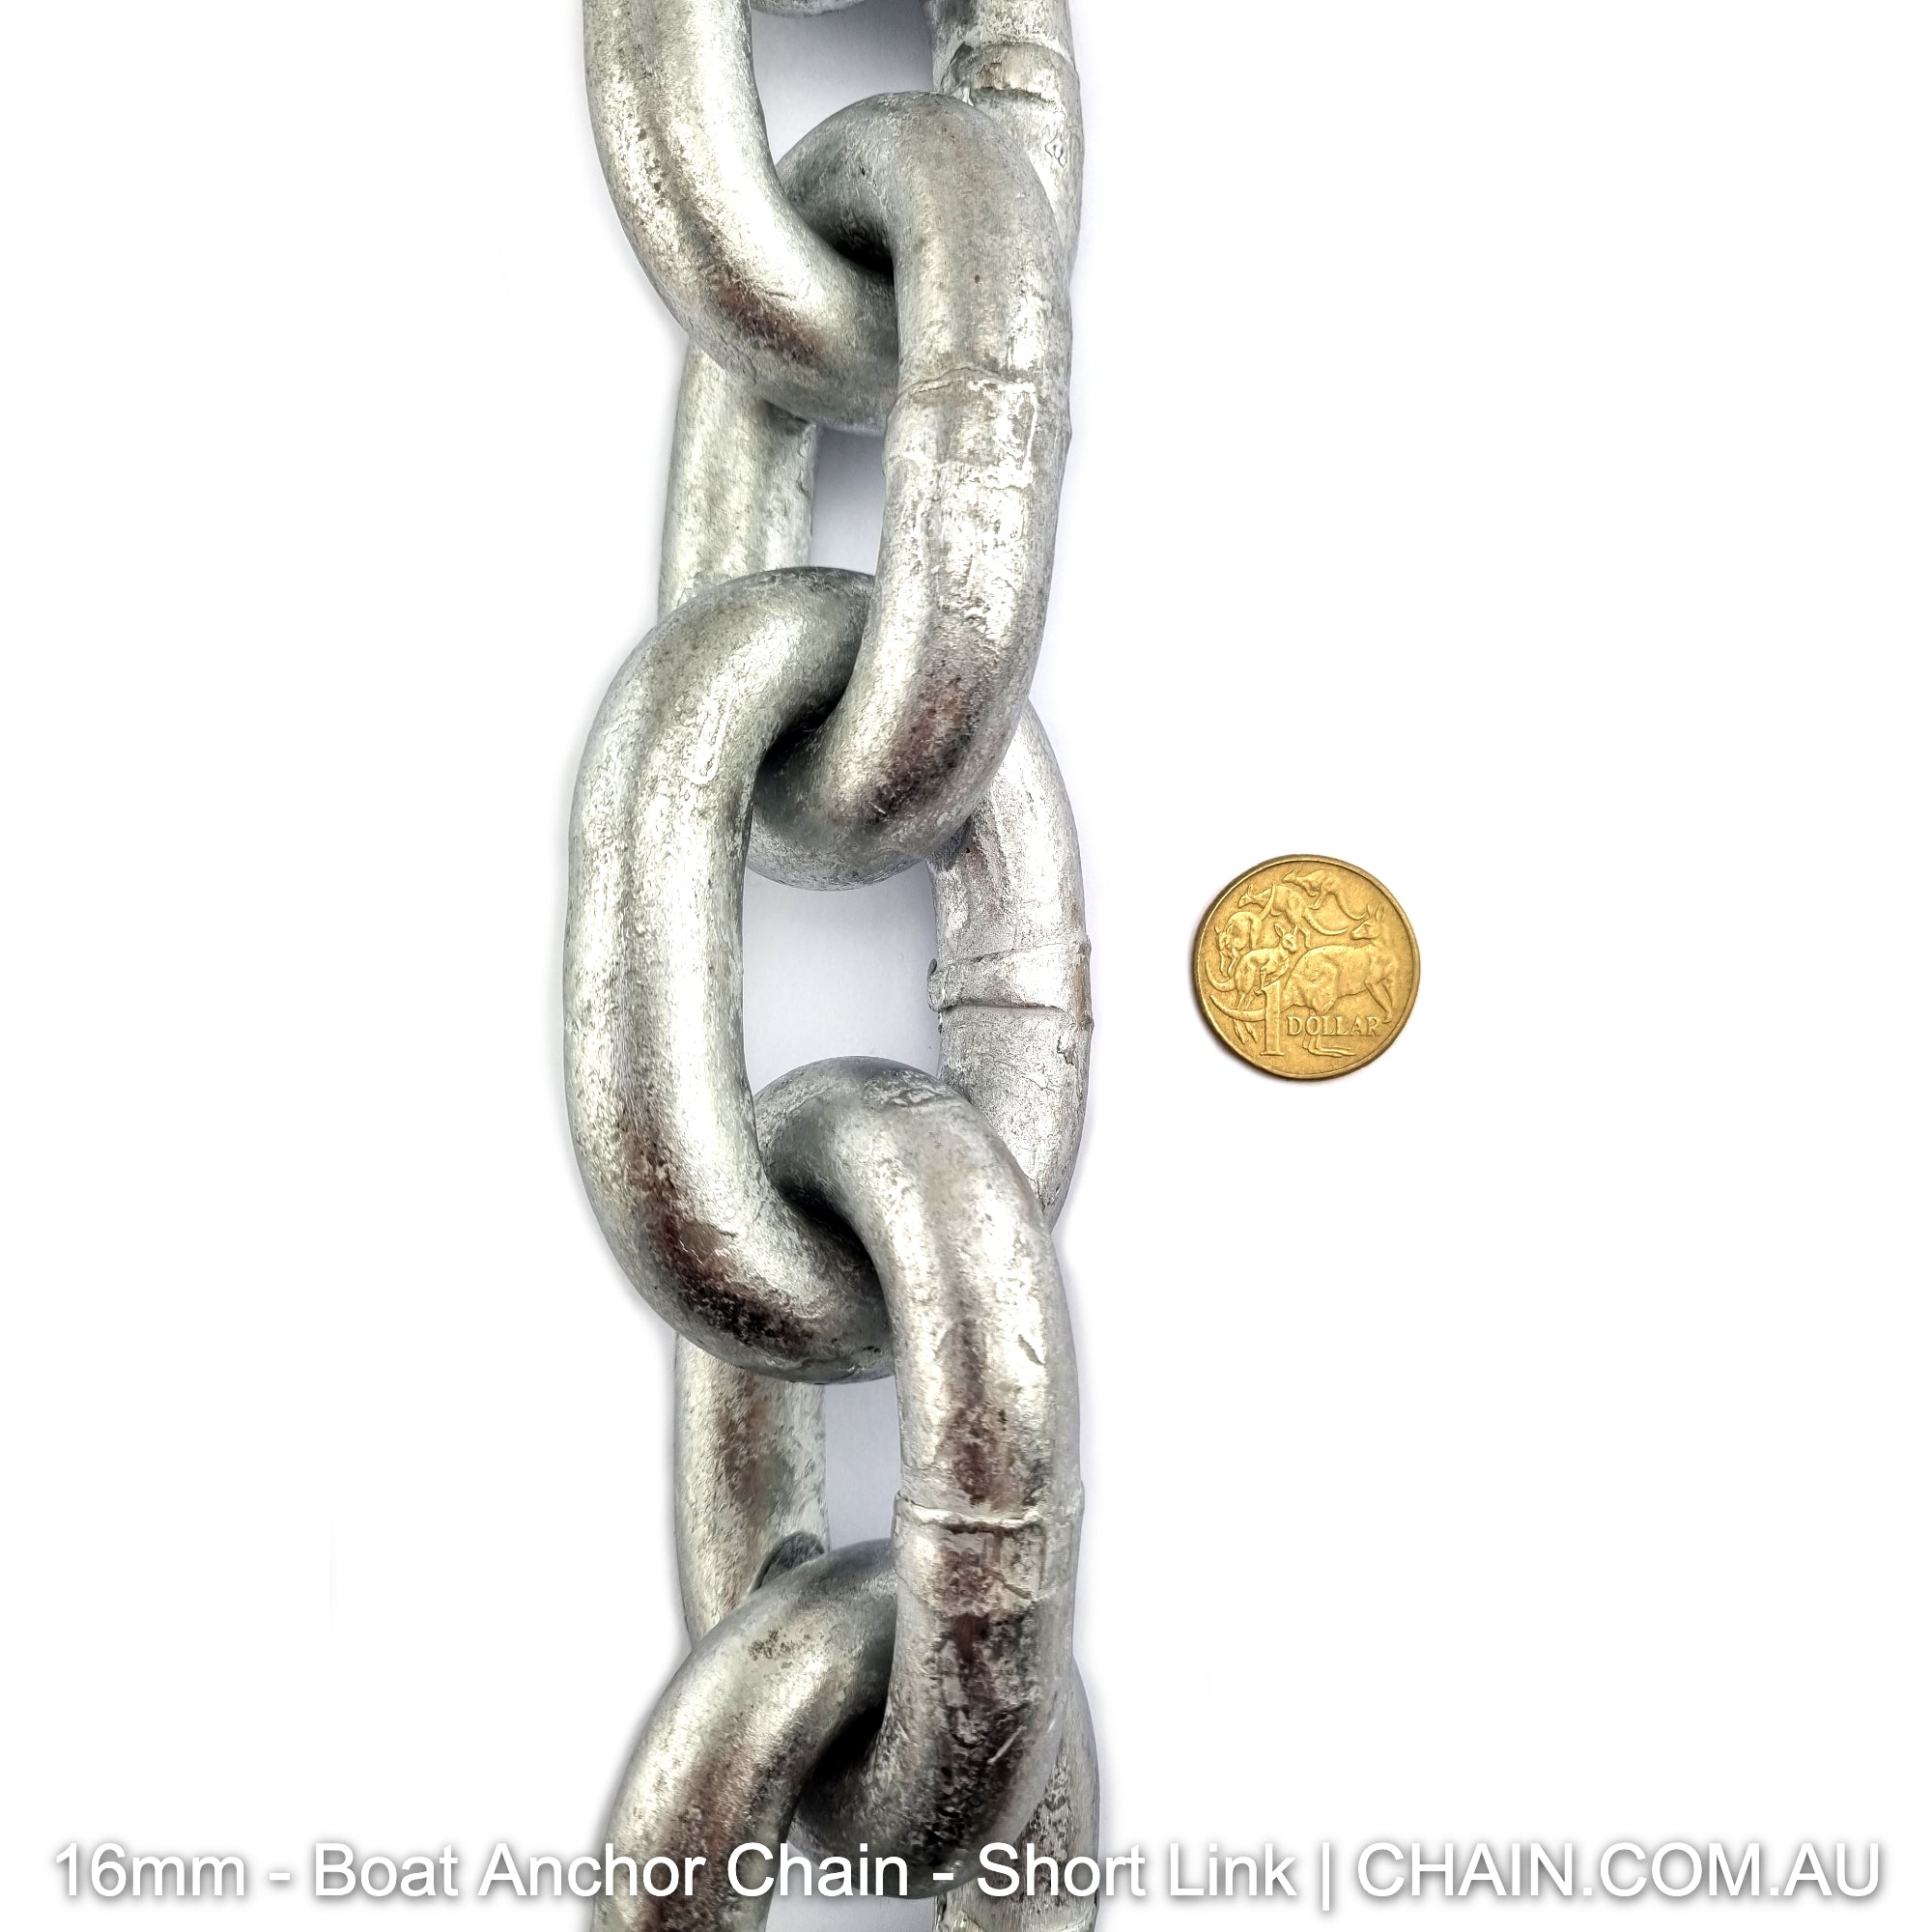 Boat Anchor Chain - Short Link - Galvanised